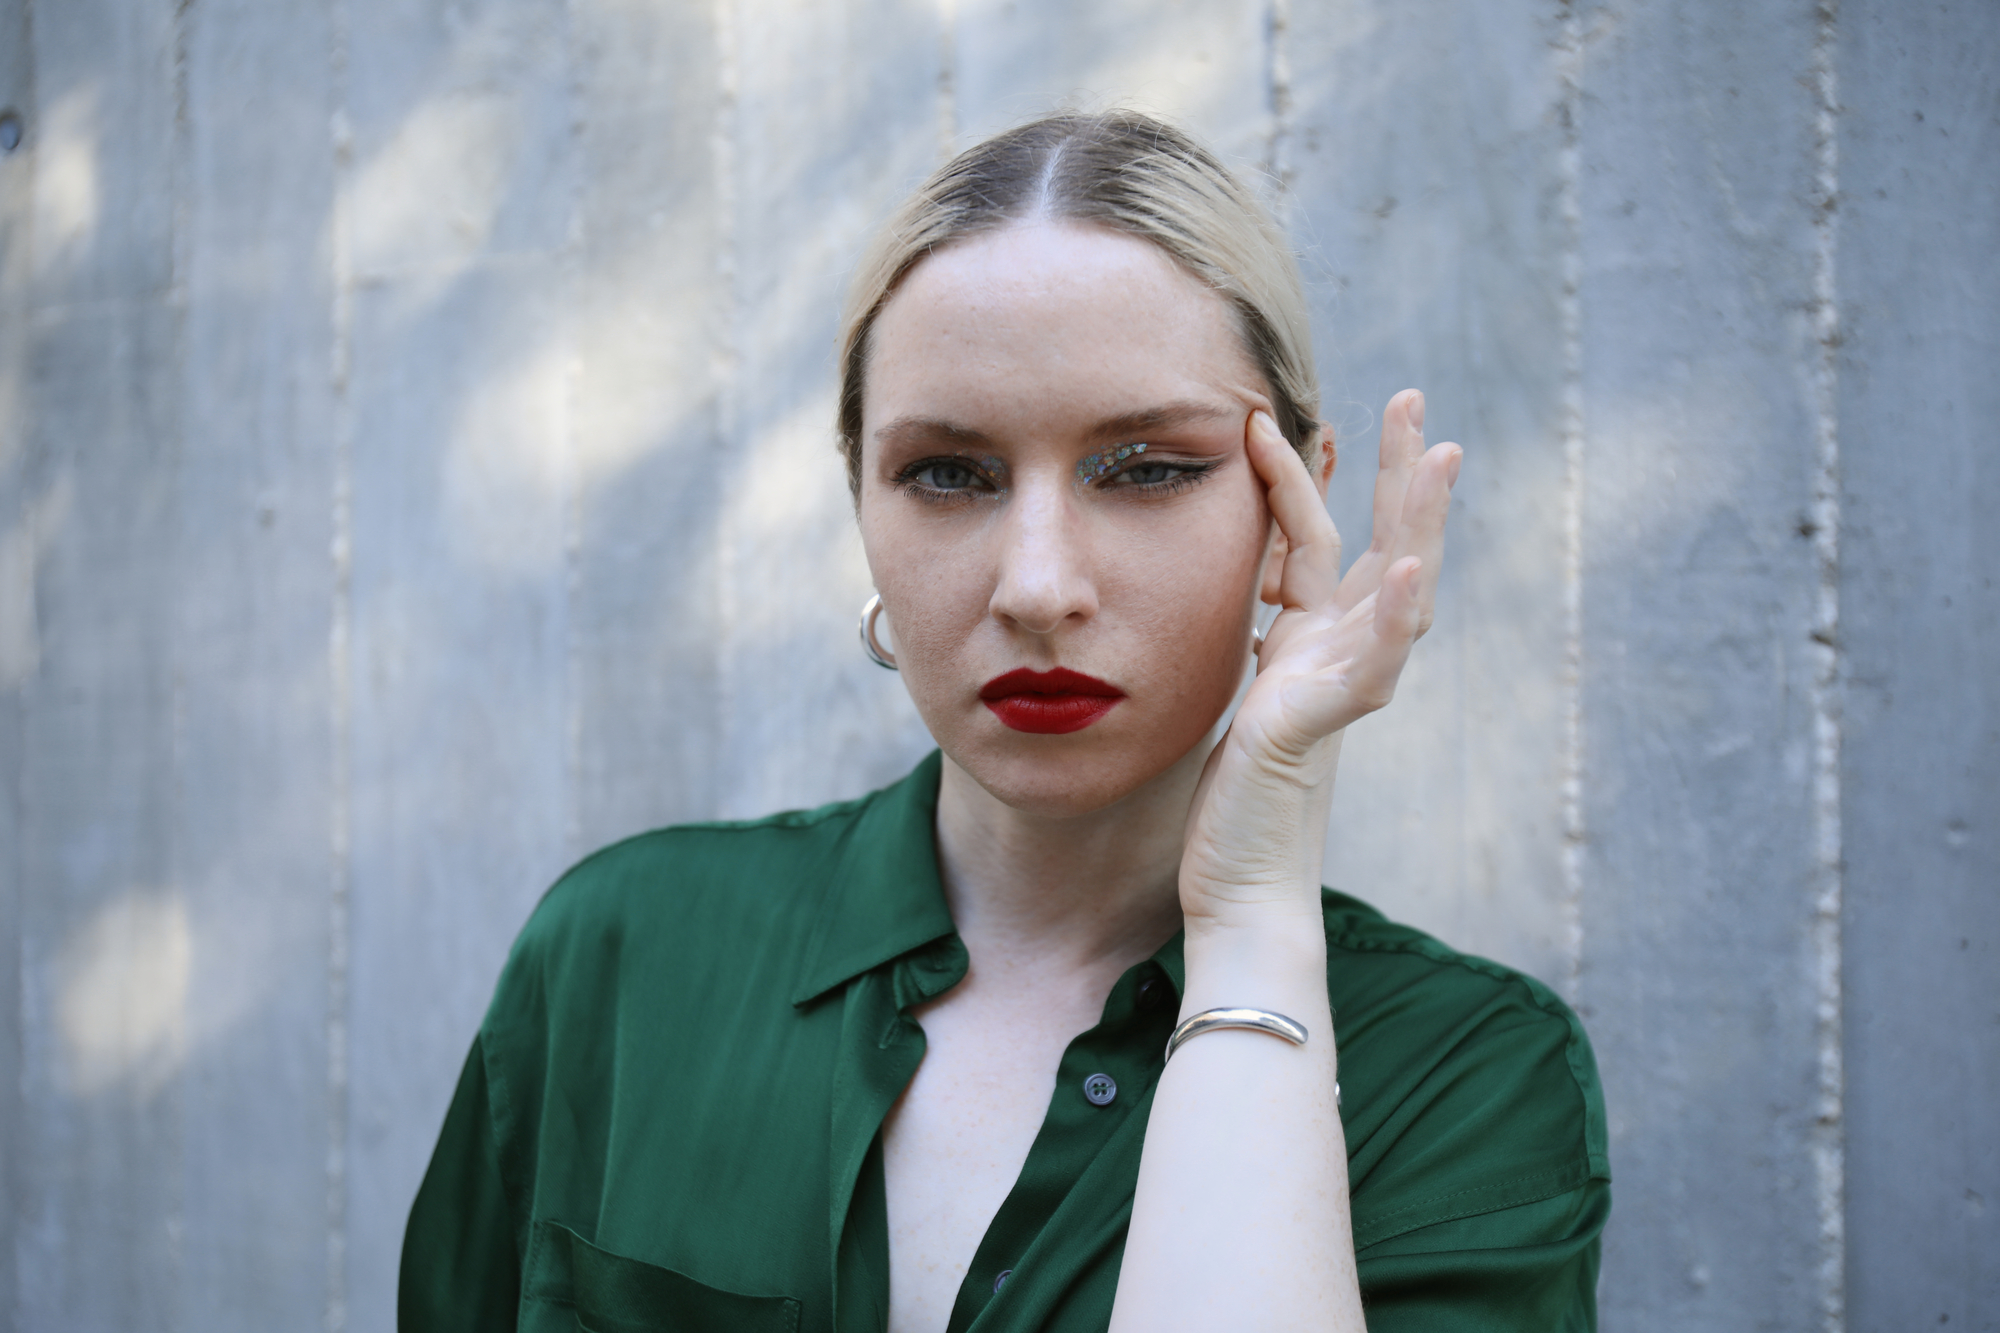 A person with blonde hair, pulled back, wearing a green blouse and hoop earrings, poses with a hand near their face. They have bold red lipstick and are in front of a gray, textured background.